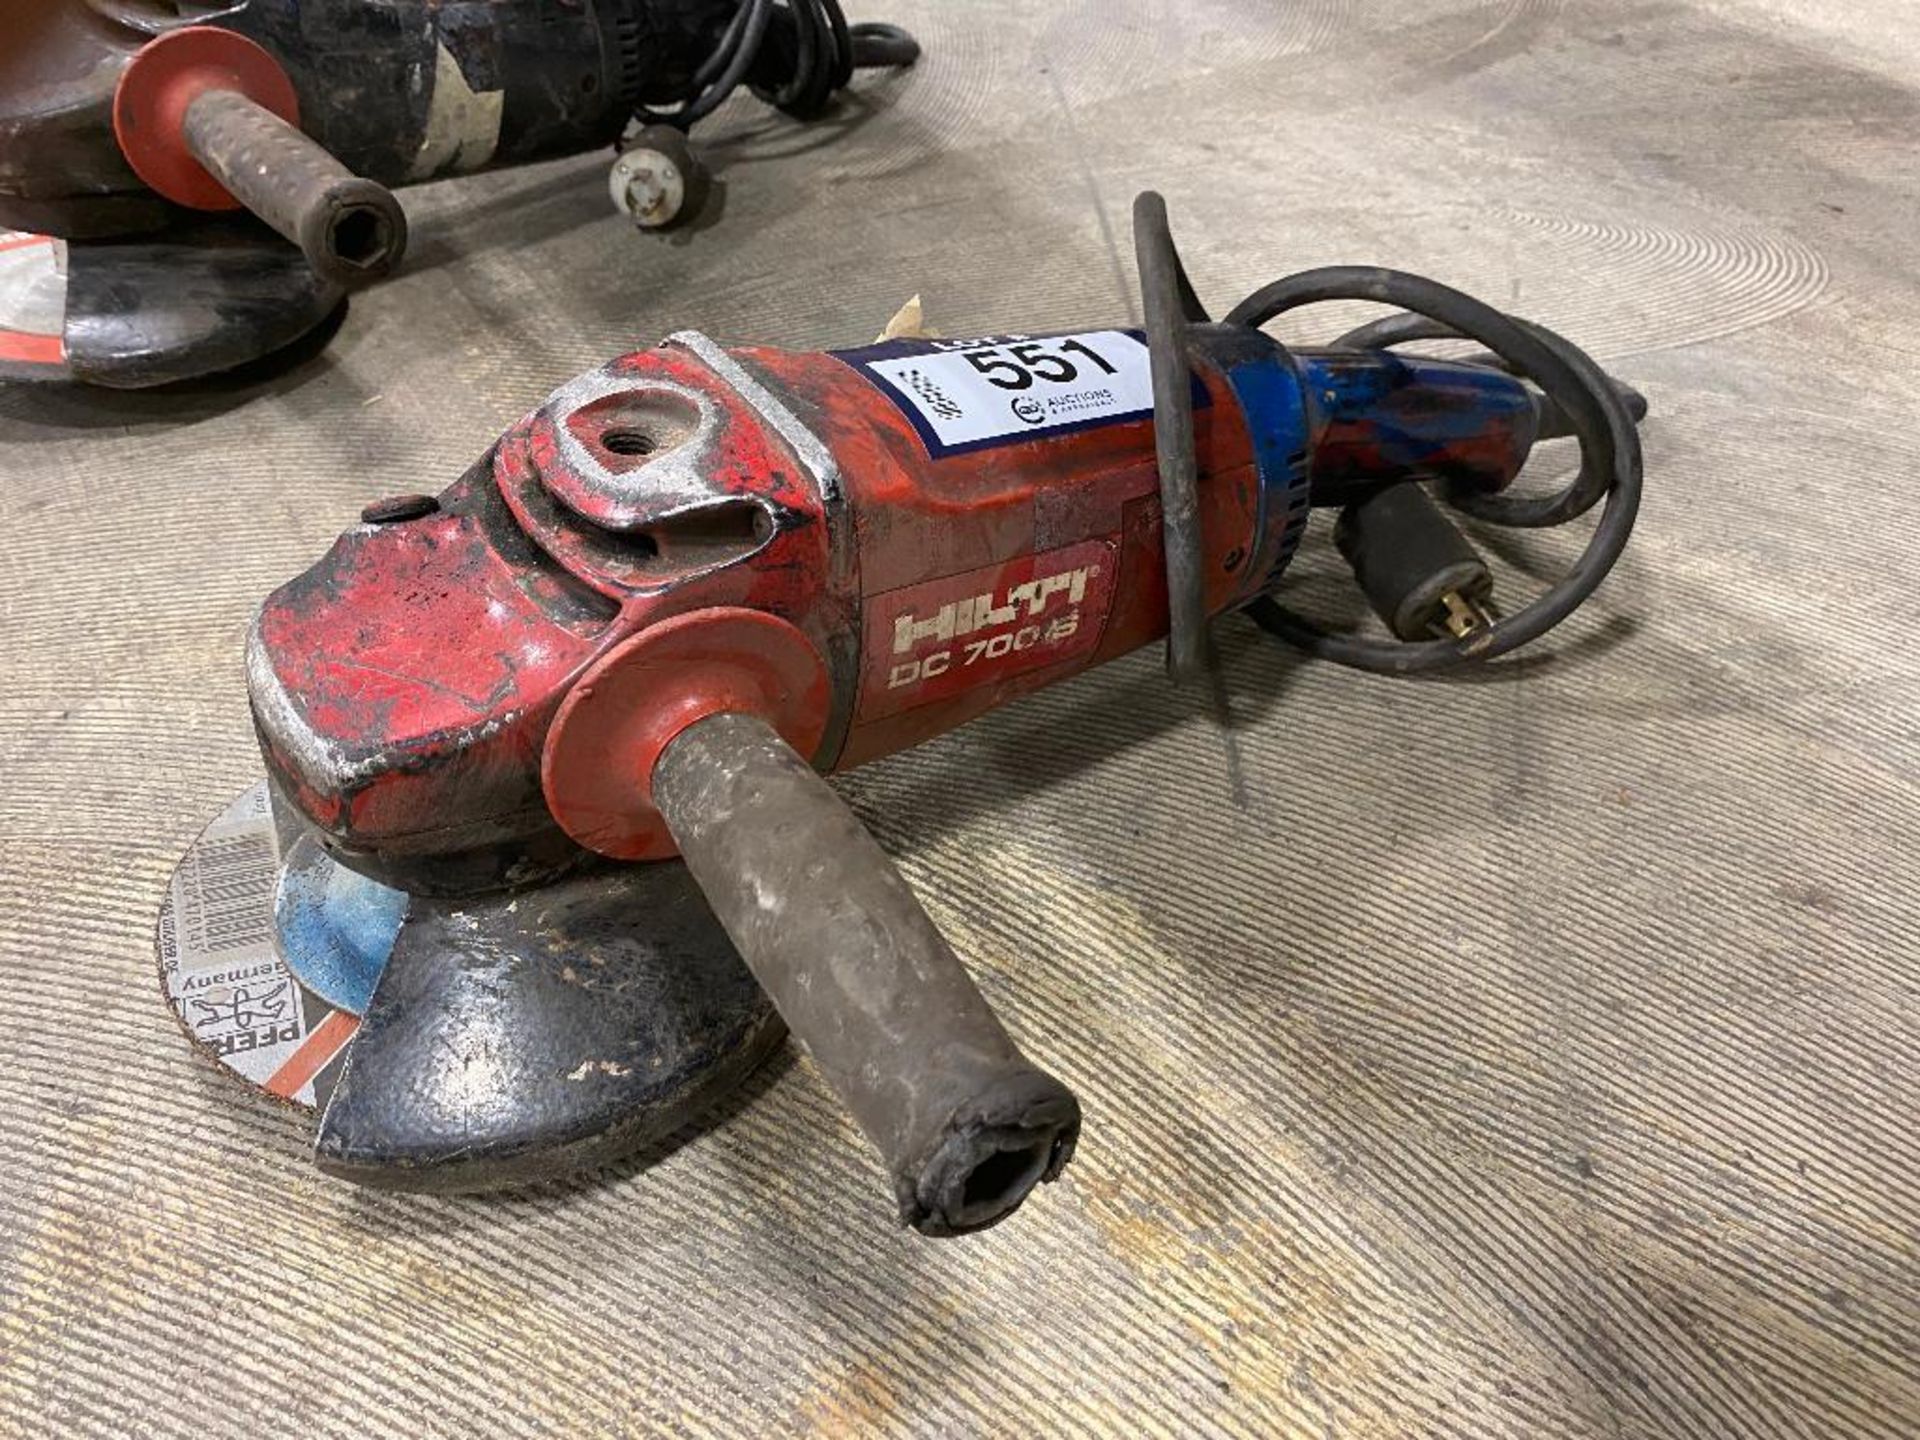 HILTI DC 700 S Electric Angle Grinder